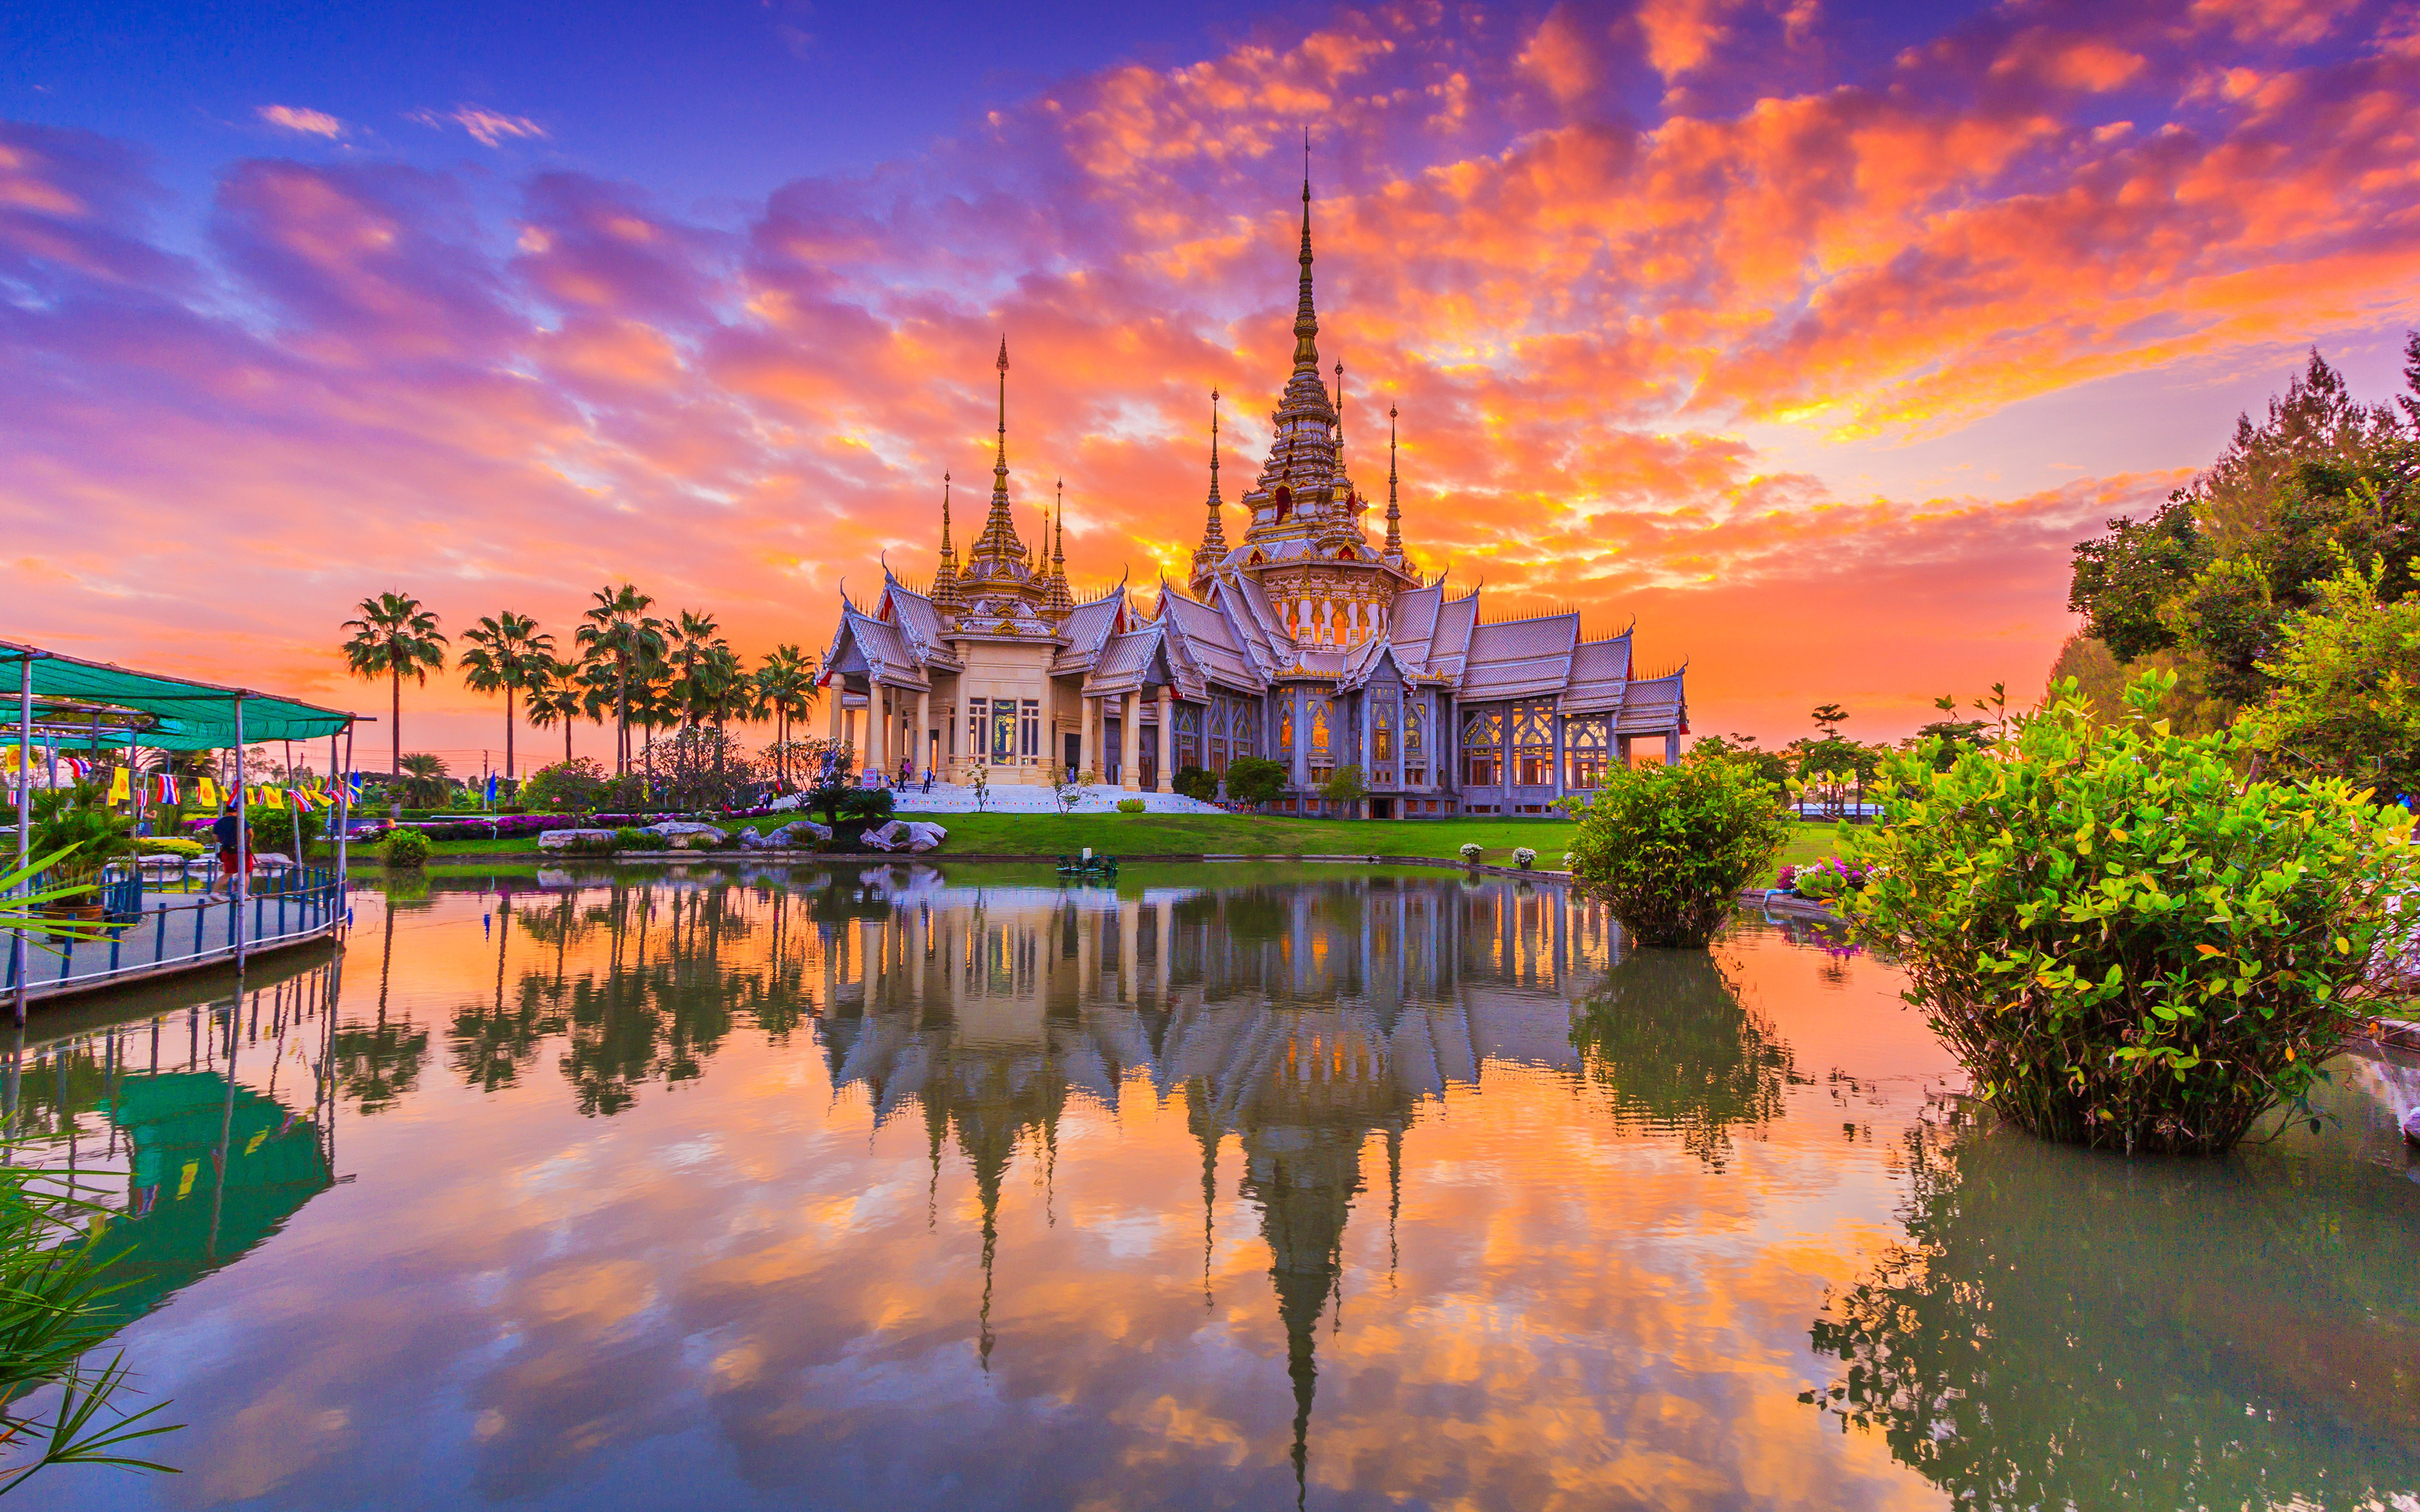 temple, temples, thailand, sunset, reflection, religious, asian, building